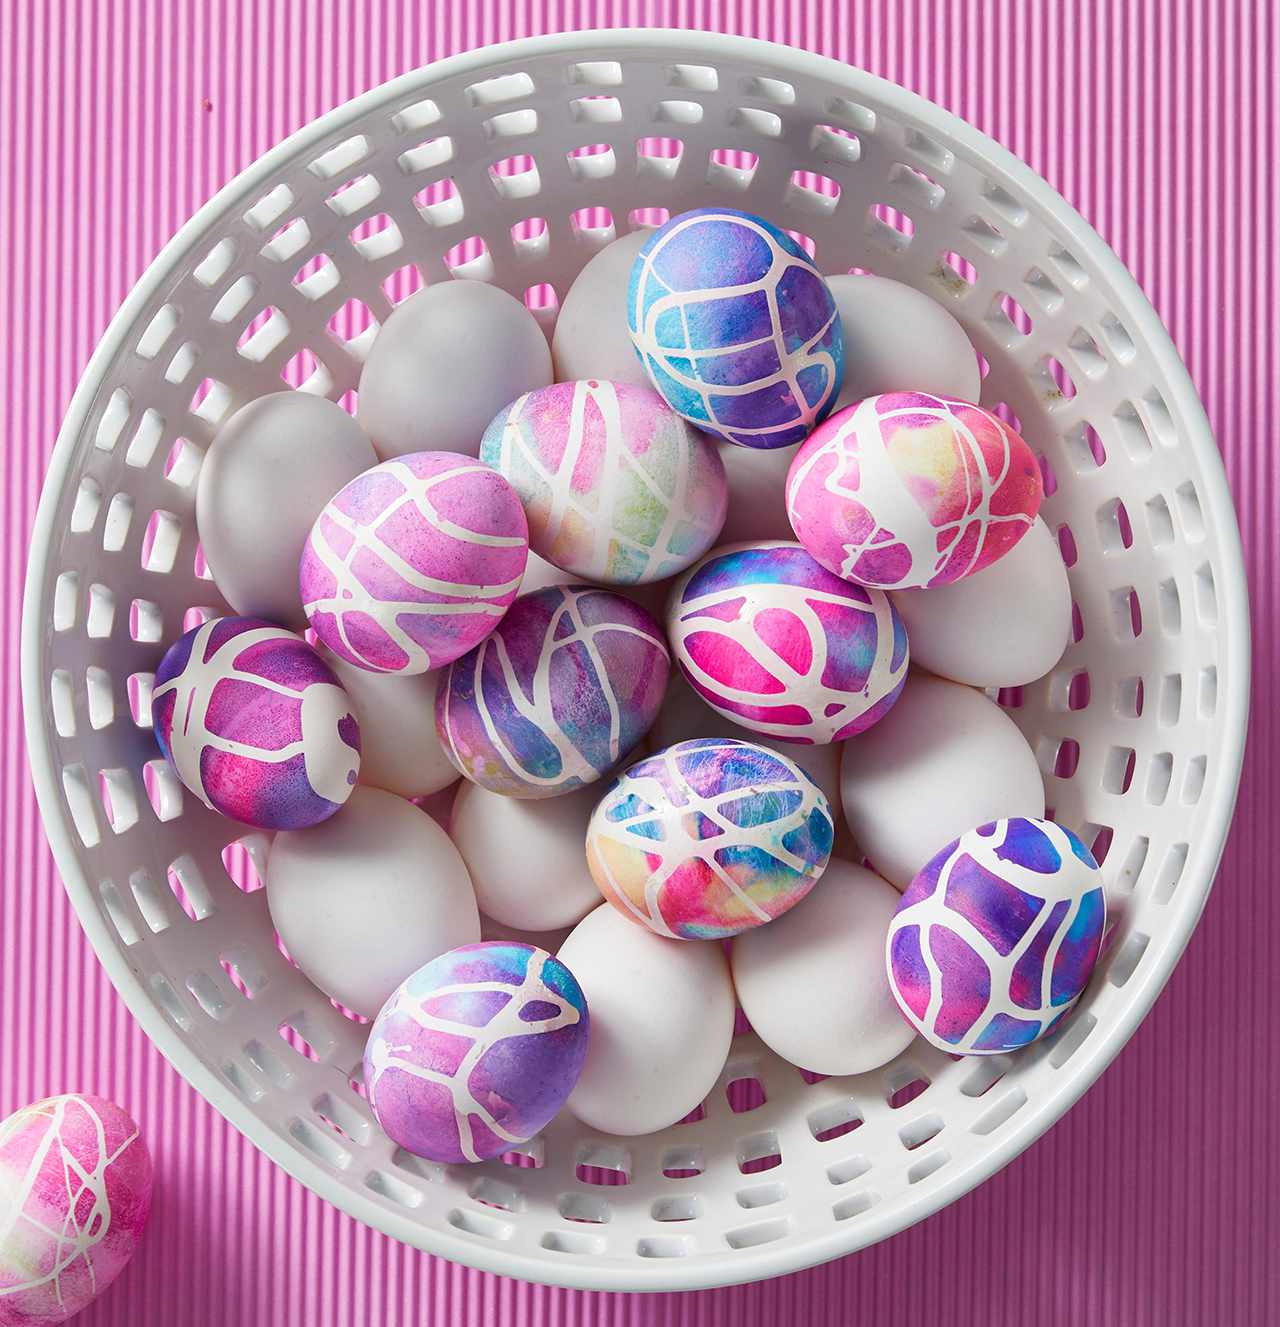 Make Tie-Dyed Easter Eggs in Less Than an Hour